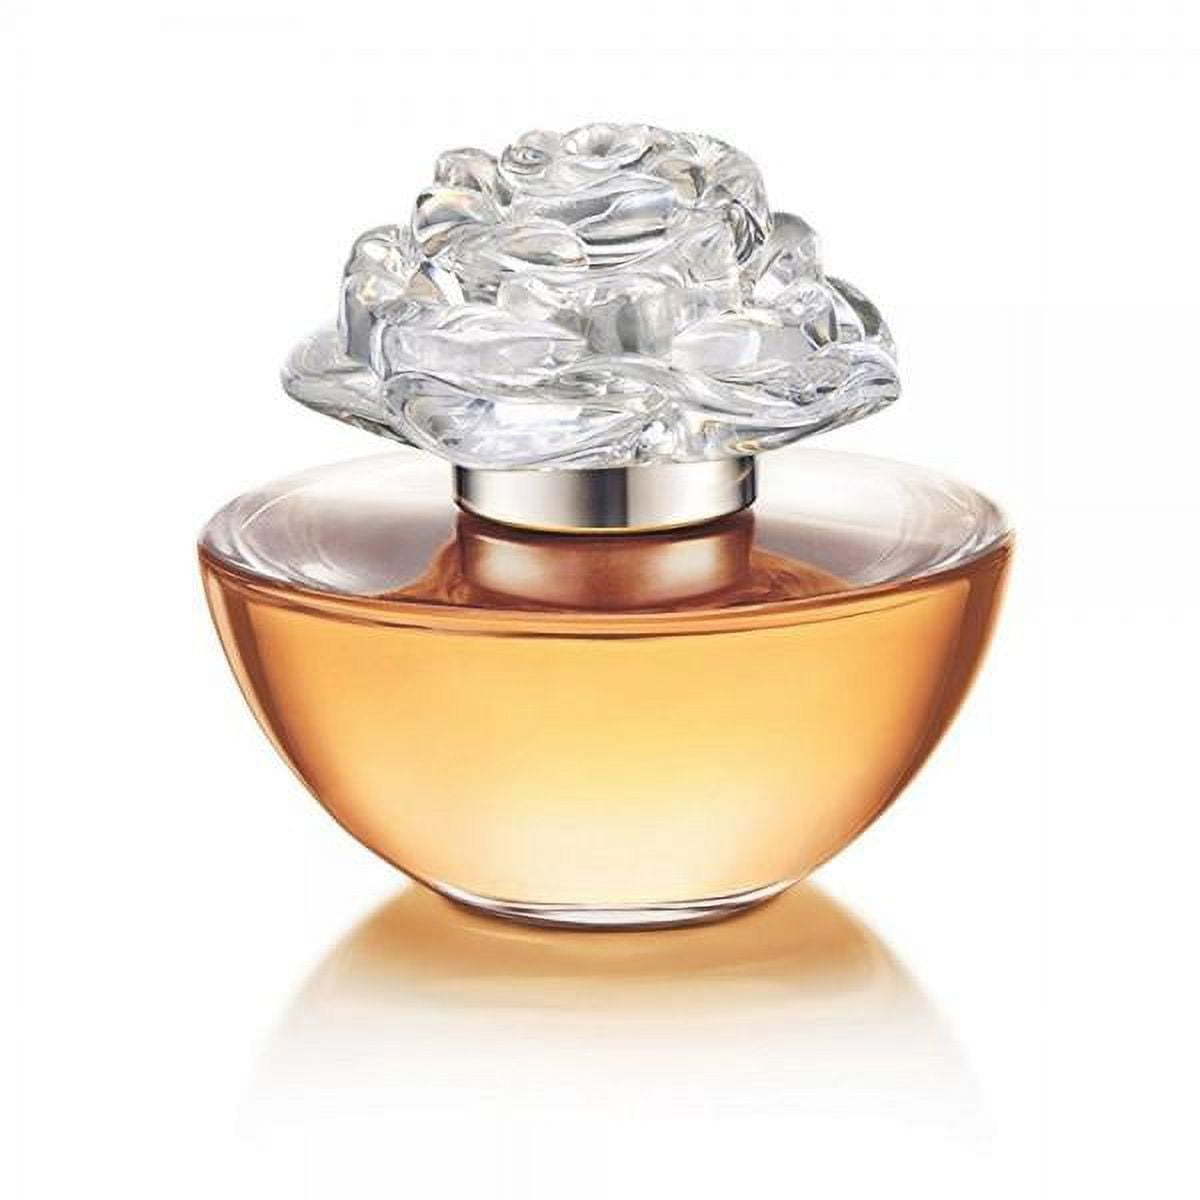 Avon in Bloom By Reese Witherspoon Limited Edition Parfum, When Sensuality  Blooms, Floral/Oriental by Avon Products 